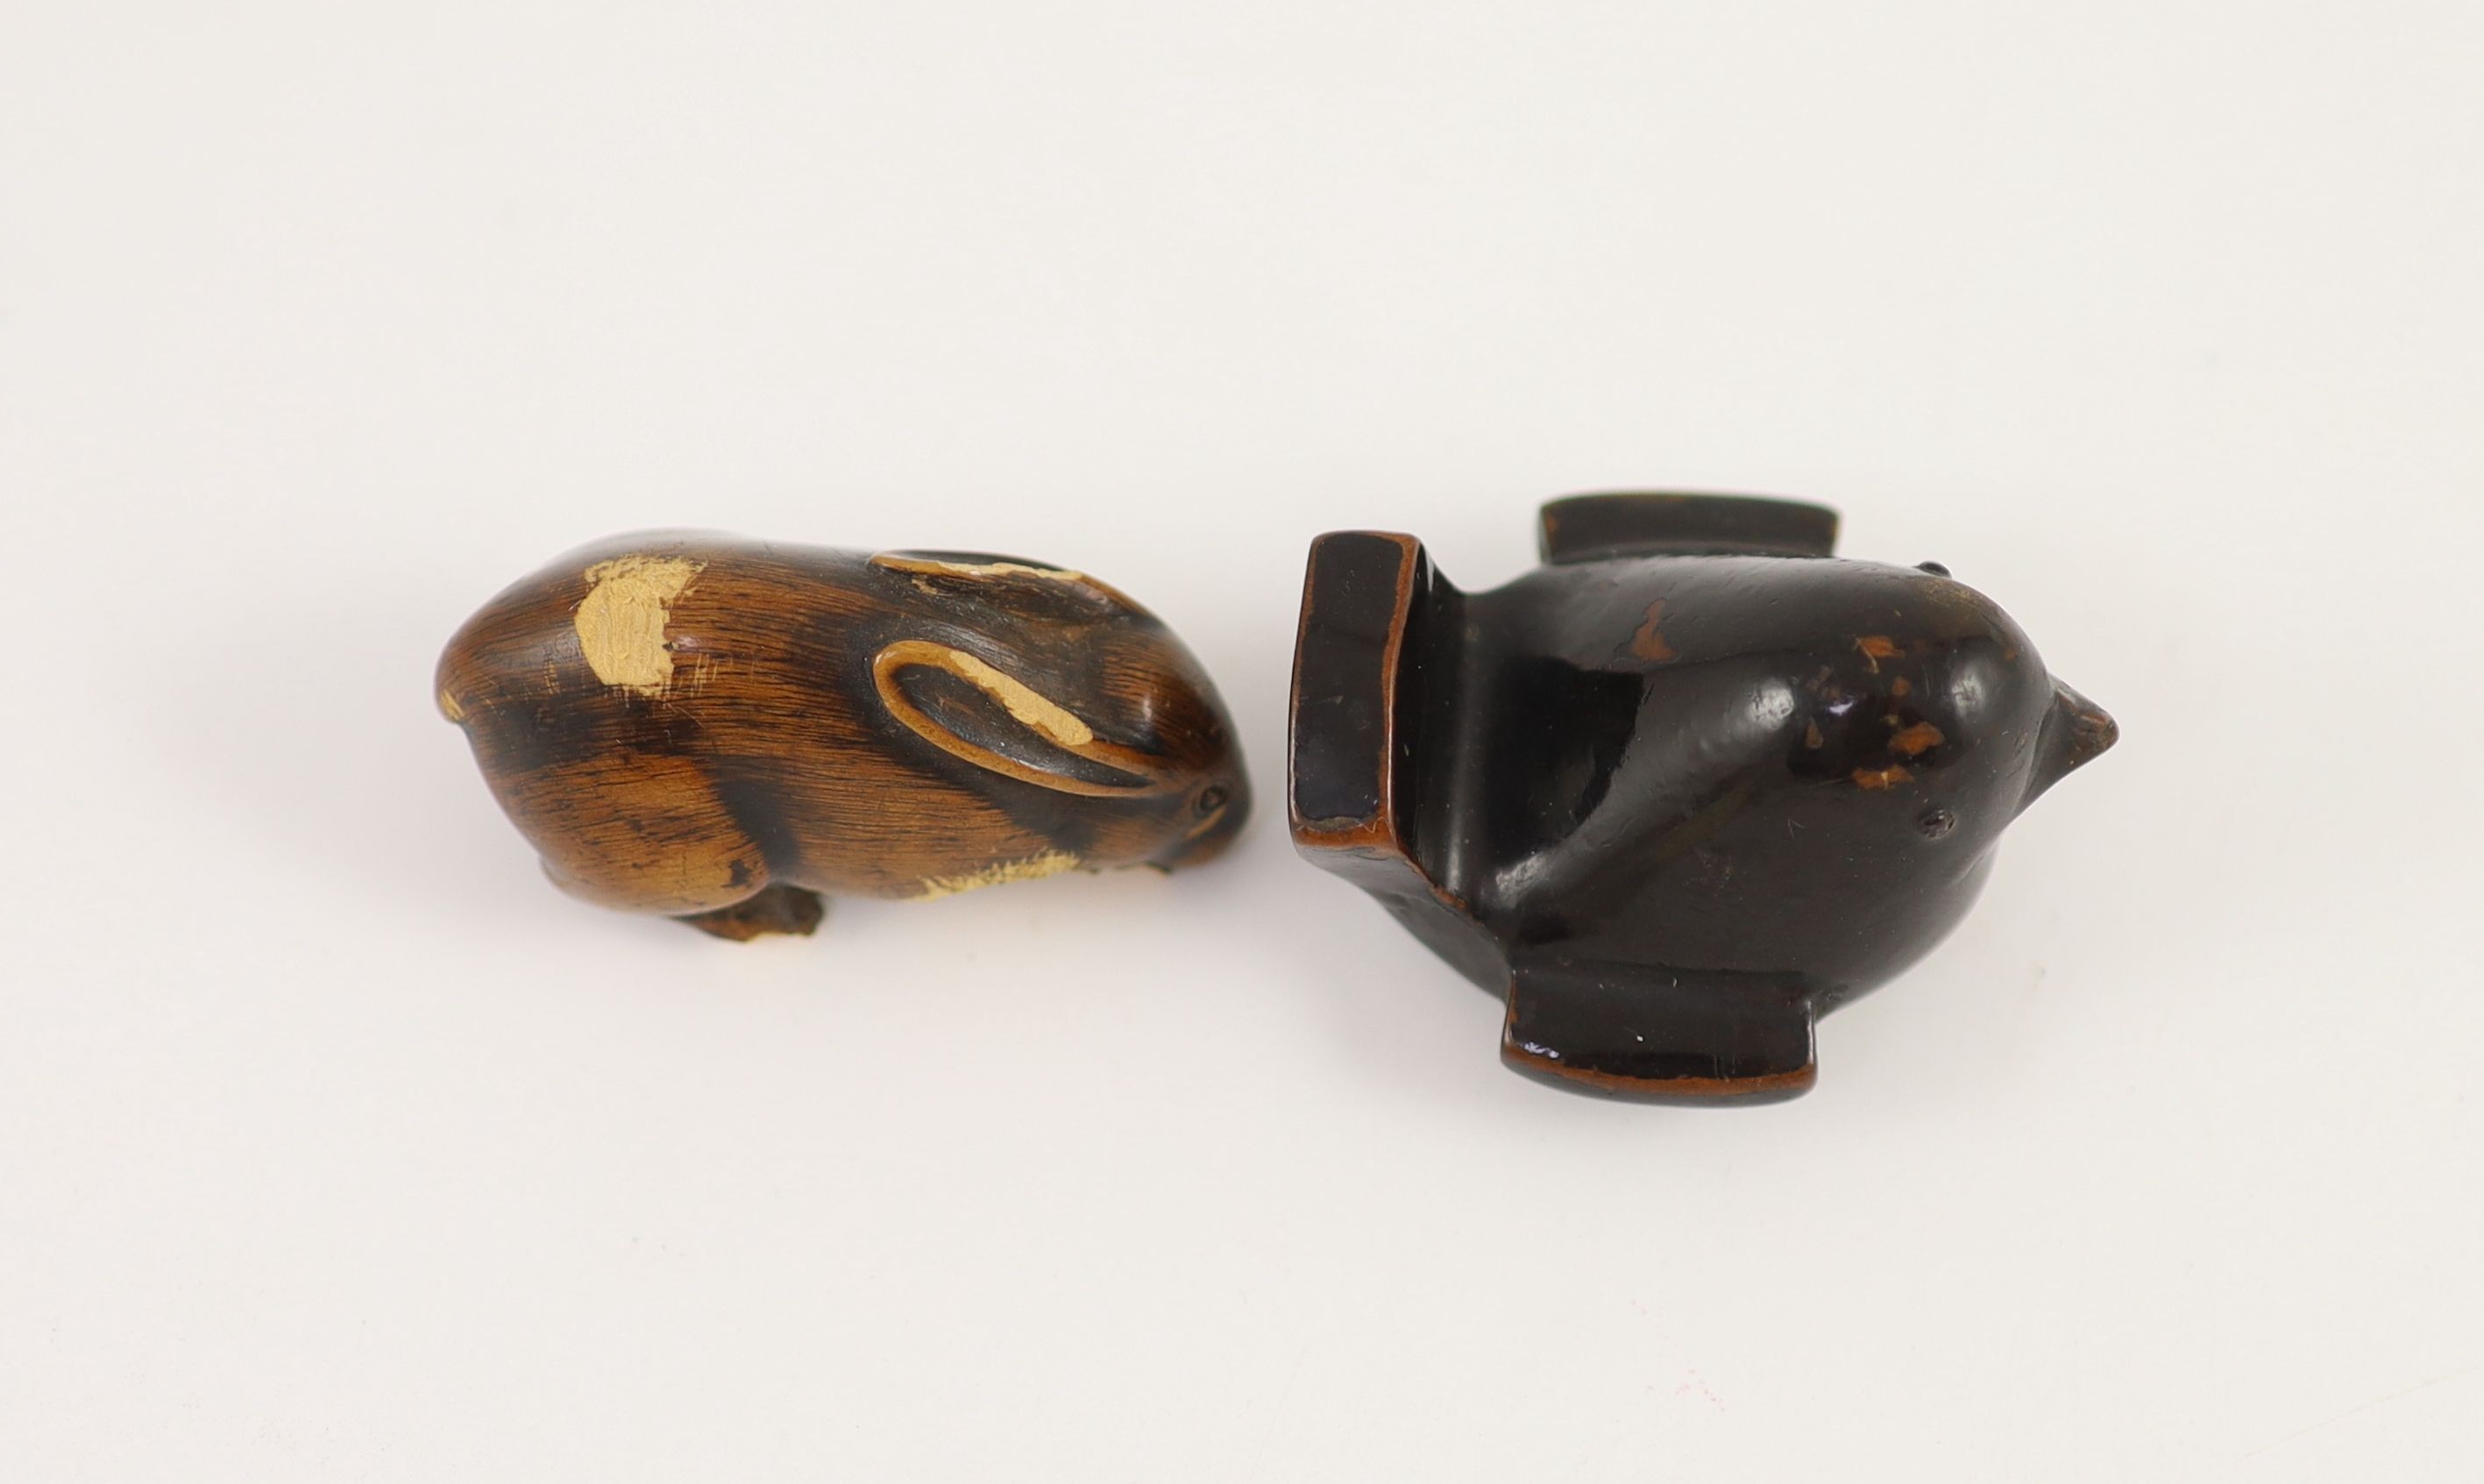 A Japanese lacquered wood netsuke of a bird and a wooden netsuke of a rabbit, 18th/19th century